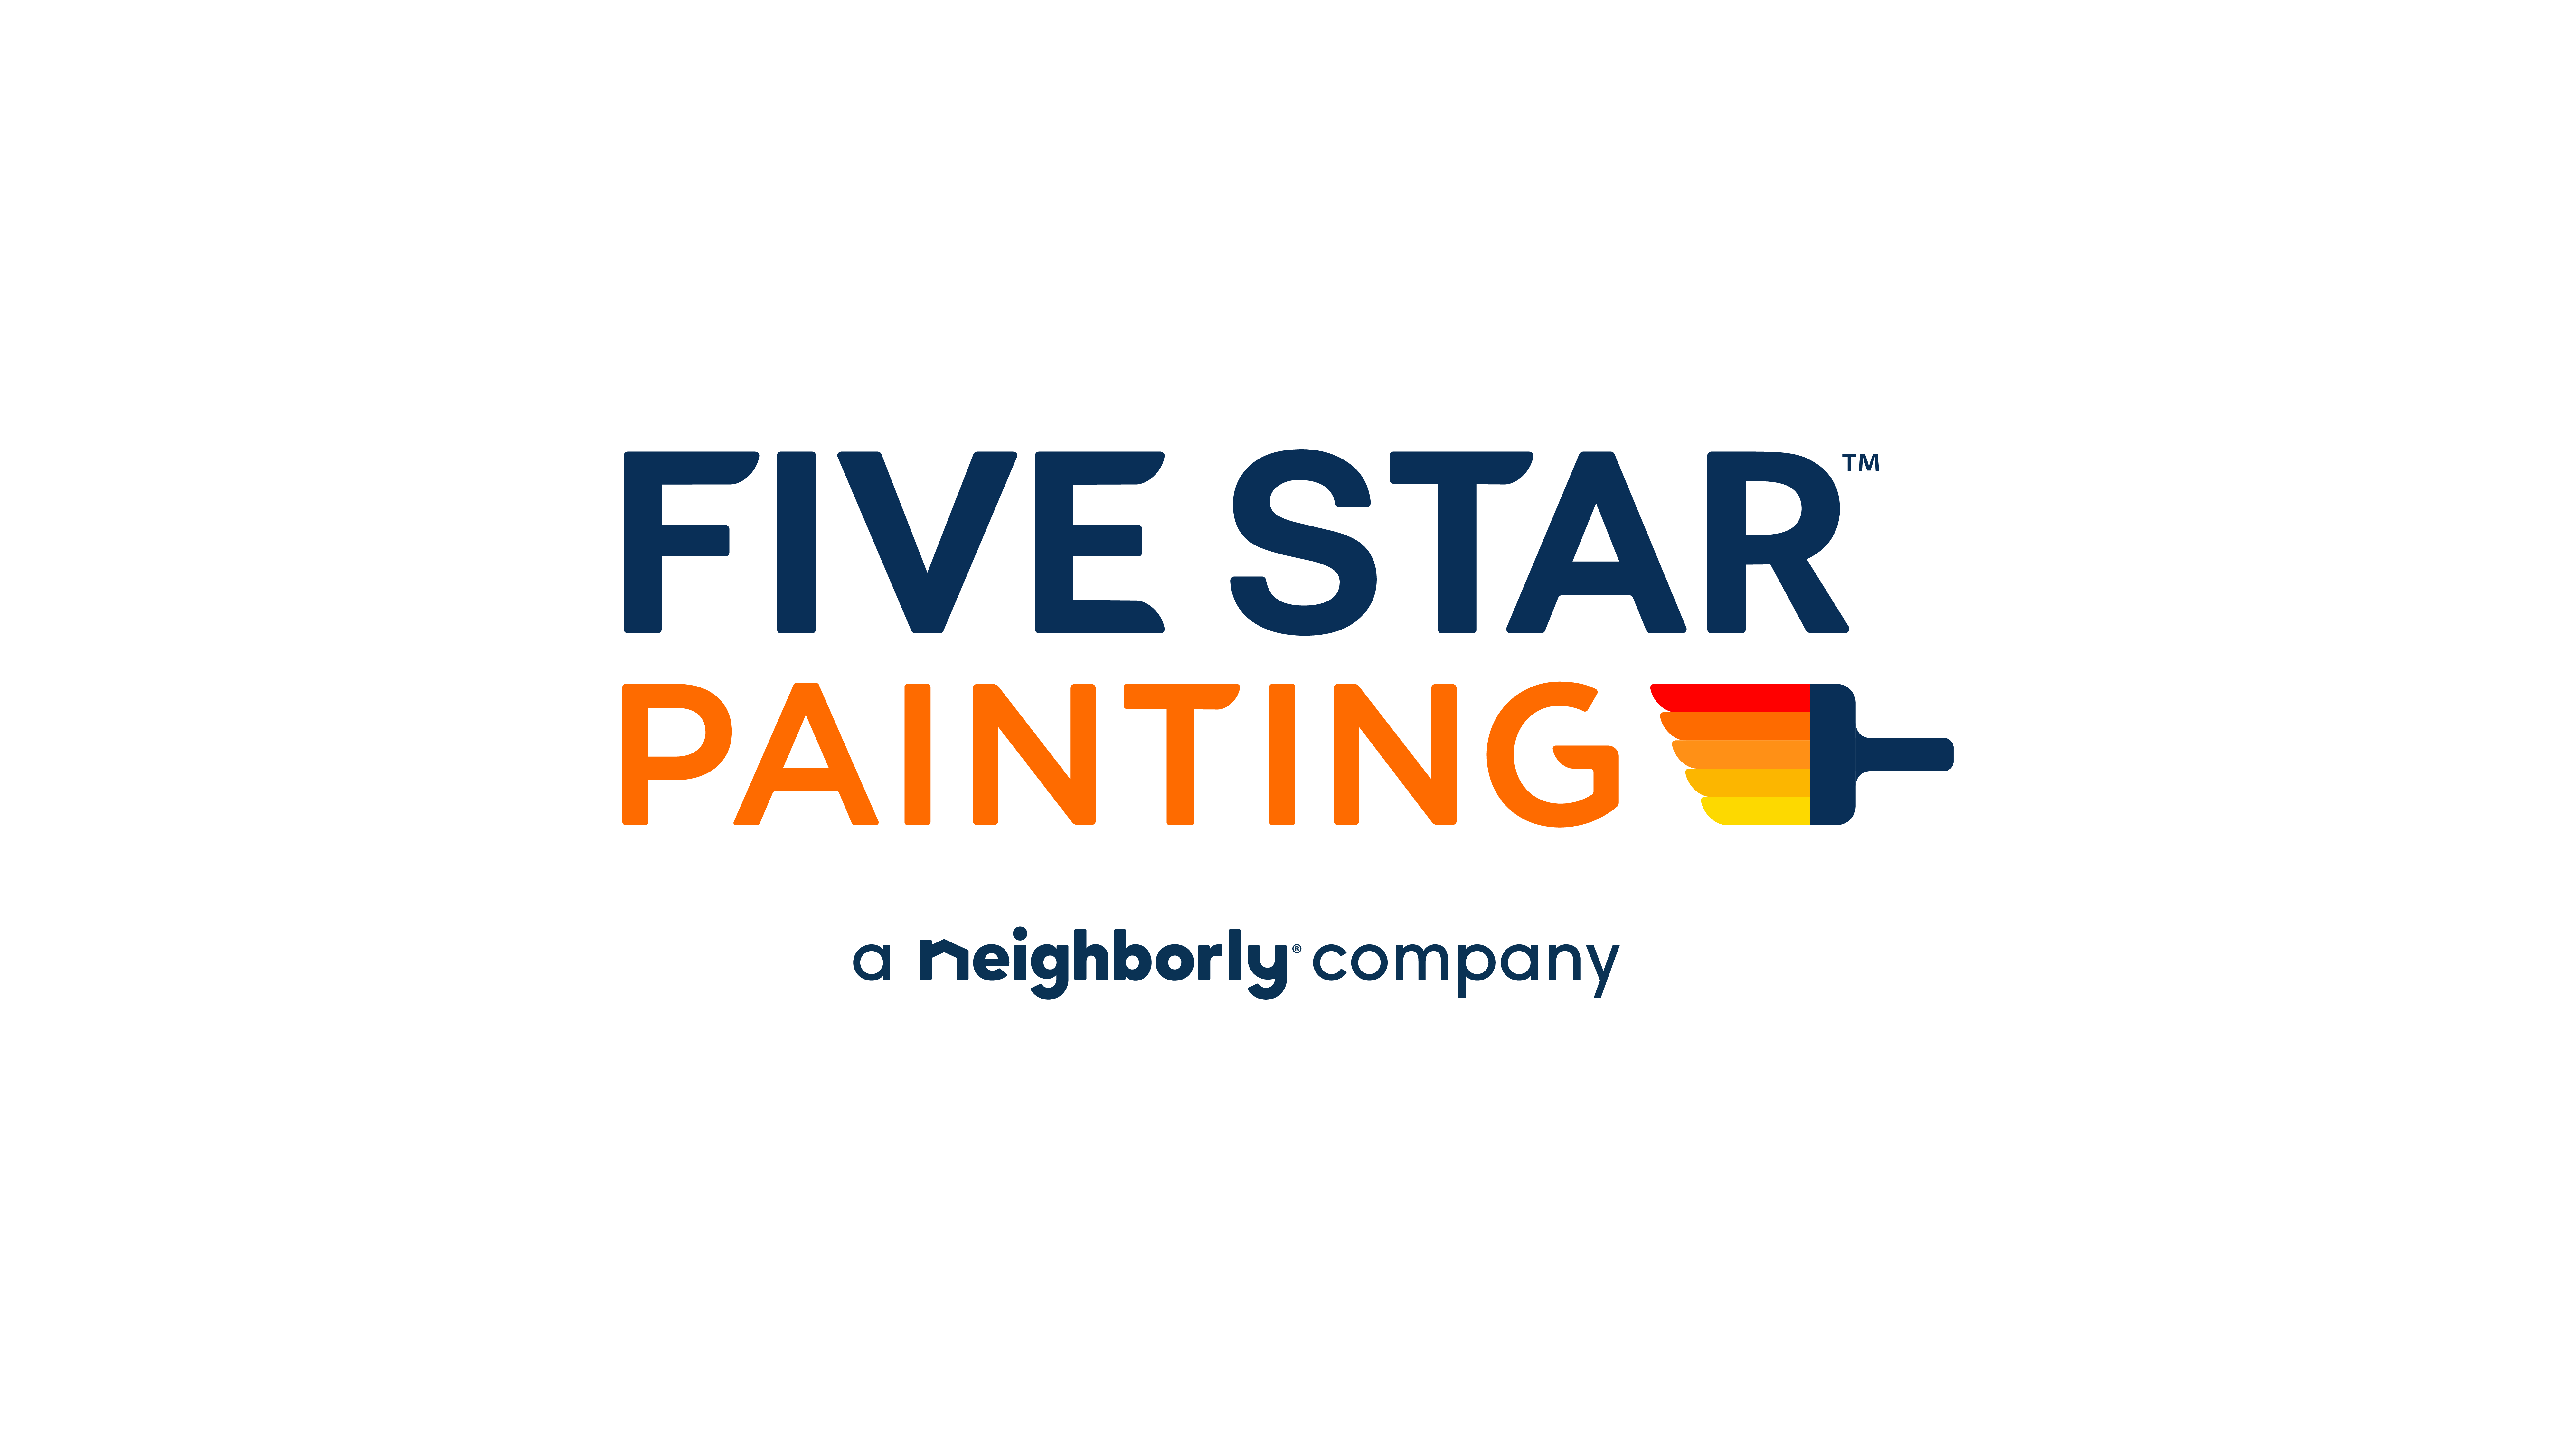 Five Star Painting of Oak Lawn - Chicago, IL - (773)242-6648 | ShowMeLocal.com